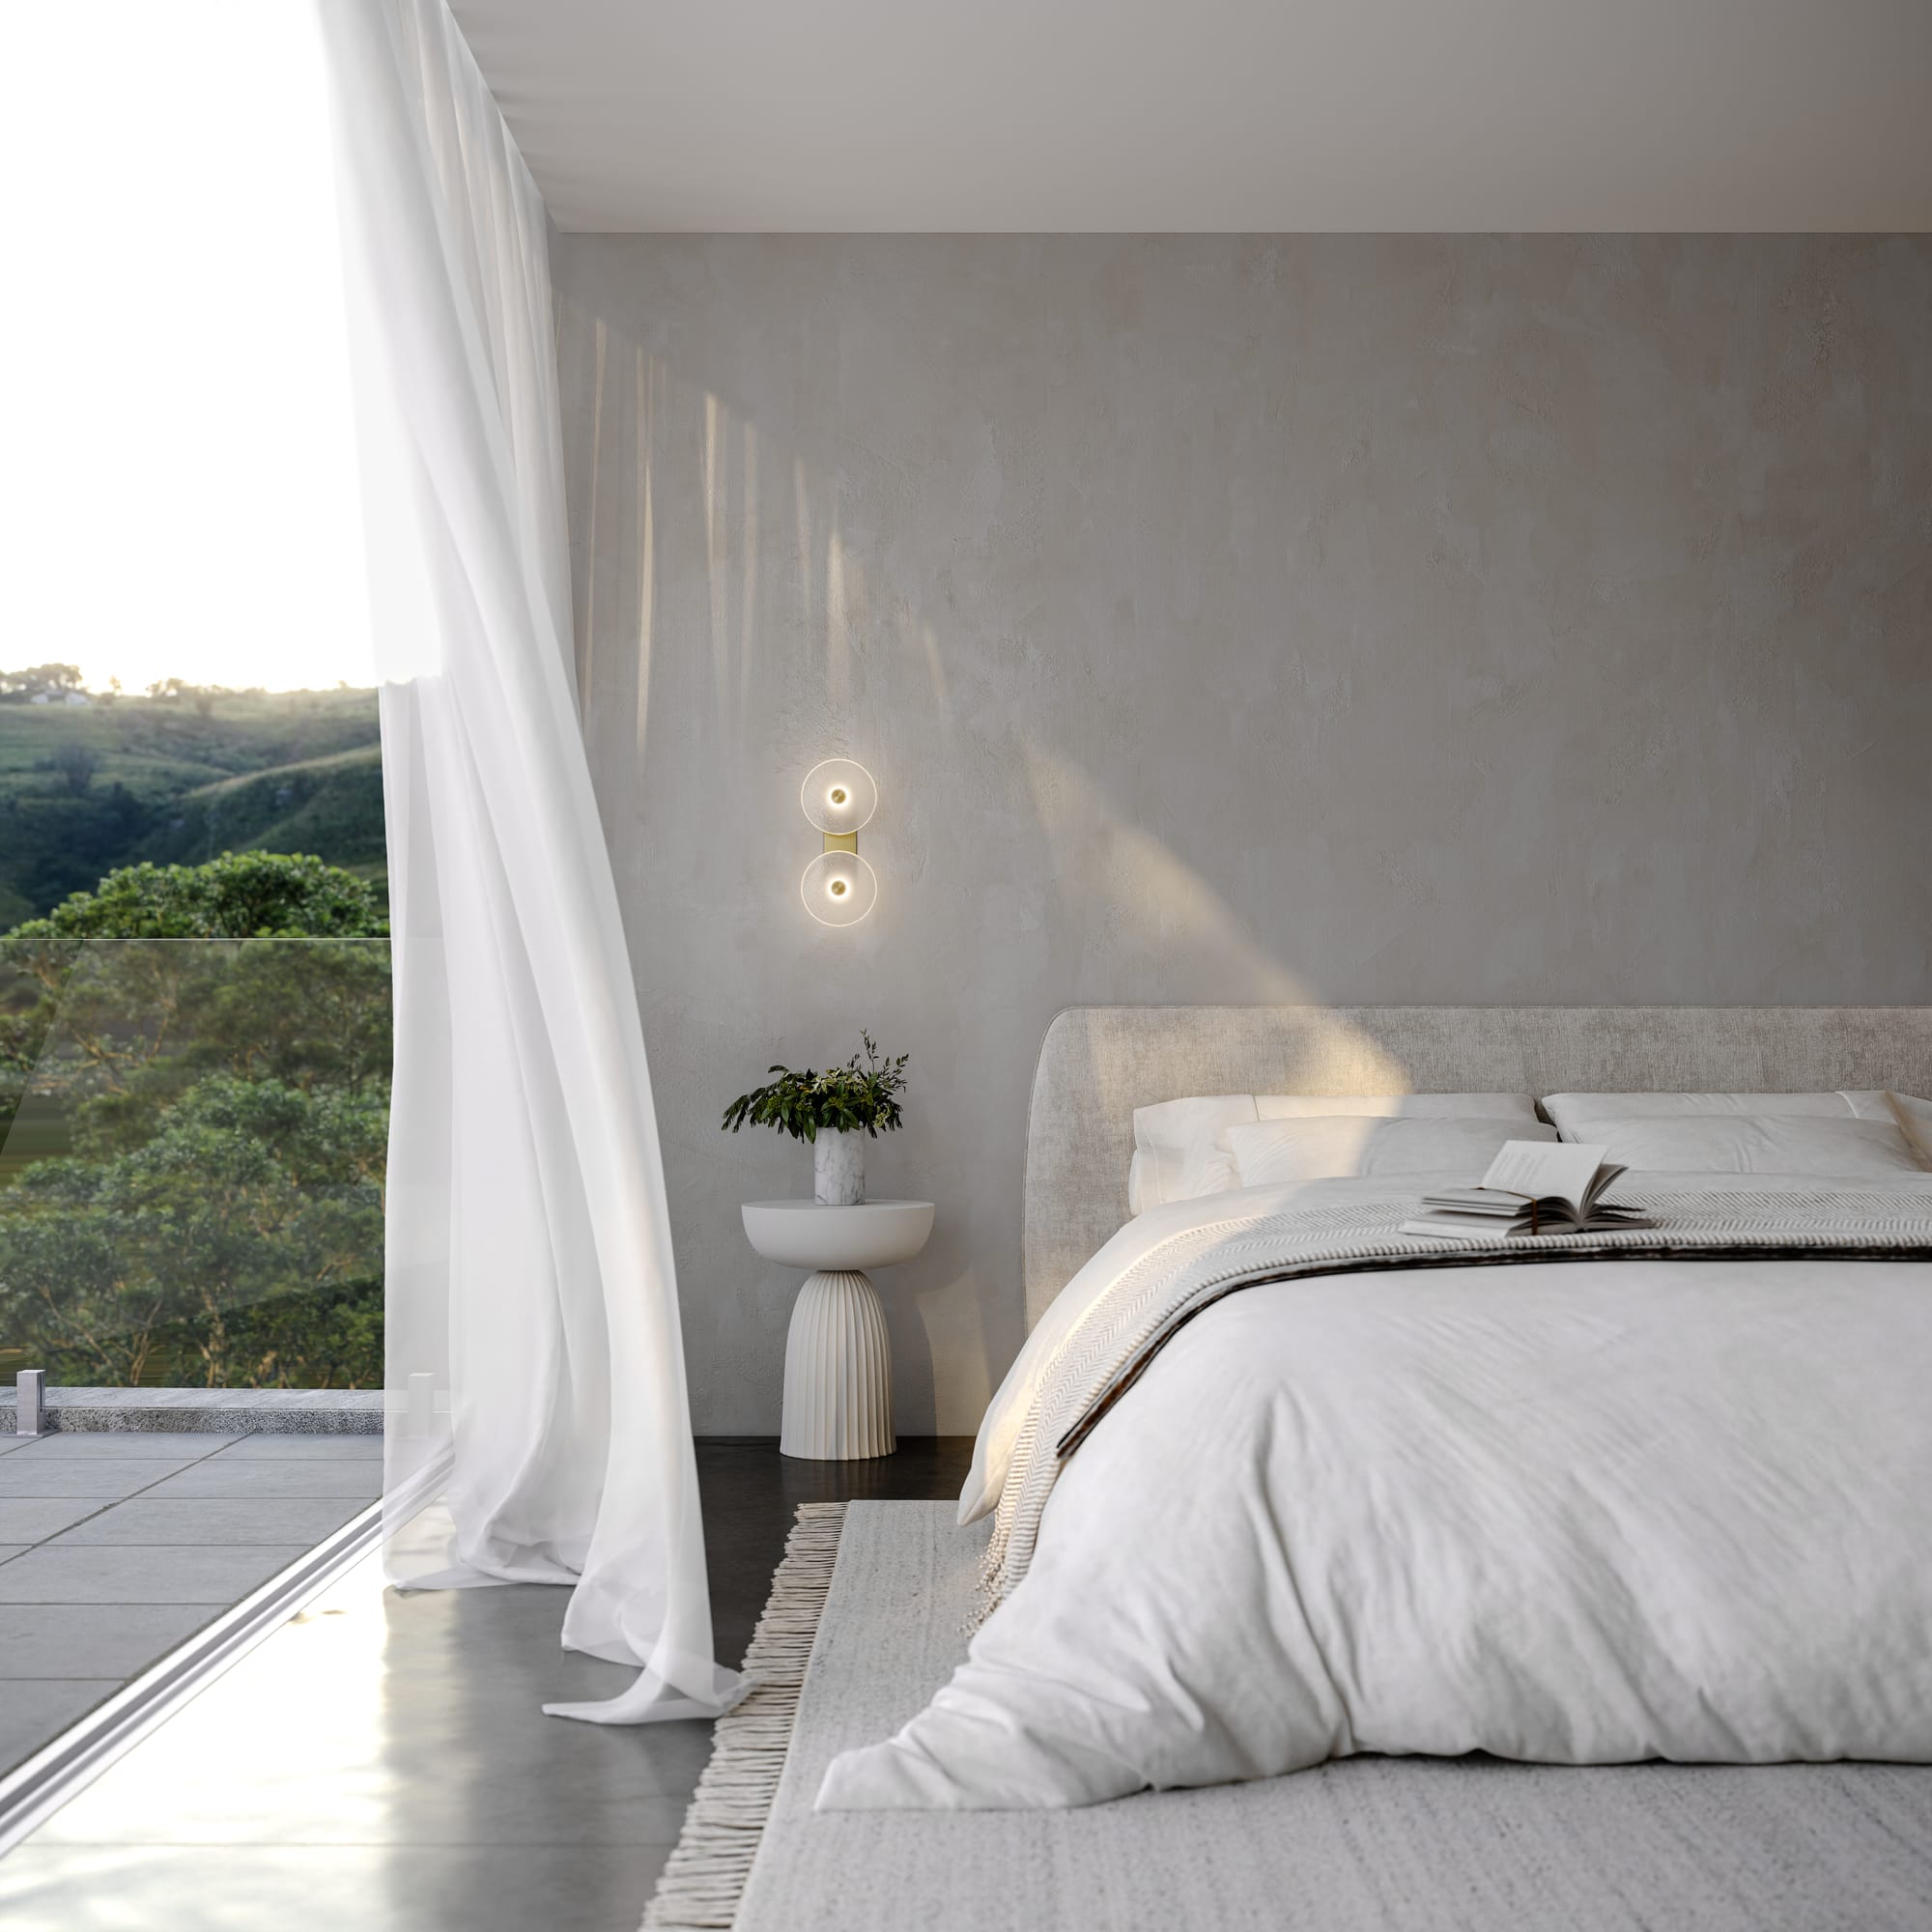 Coral Duo Wall Light by SOKTAS. Copyright of SOKTAS. Glass and old wall sconce in bedroom. Neutral bedding and furnishings. 